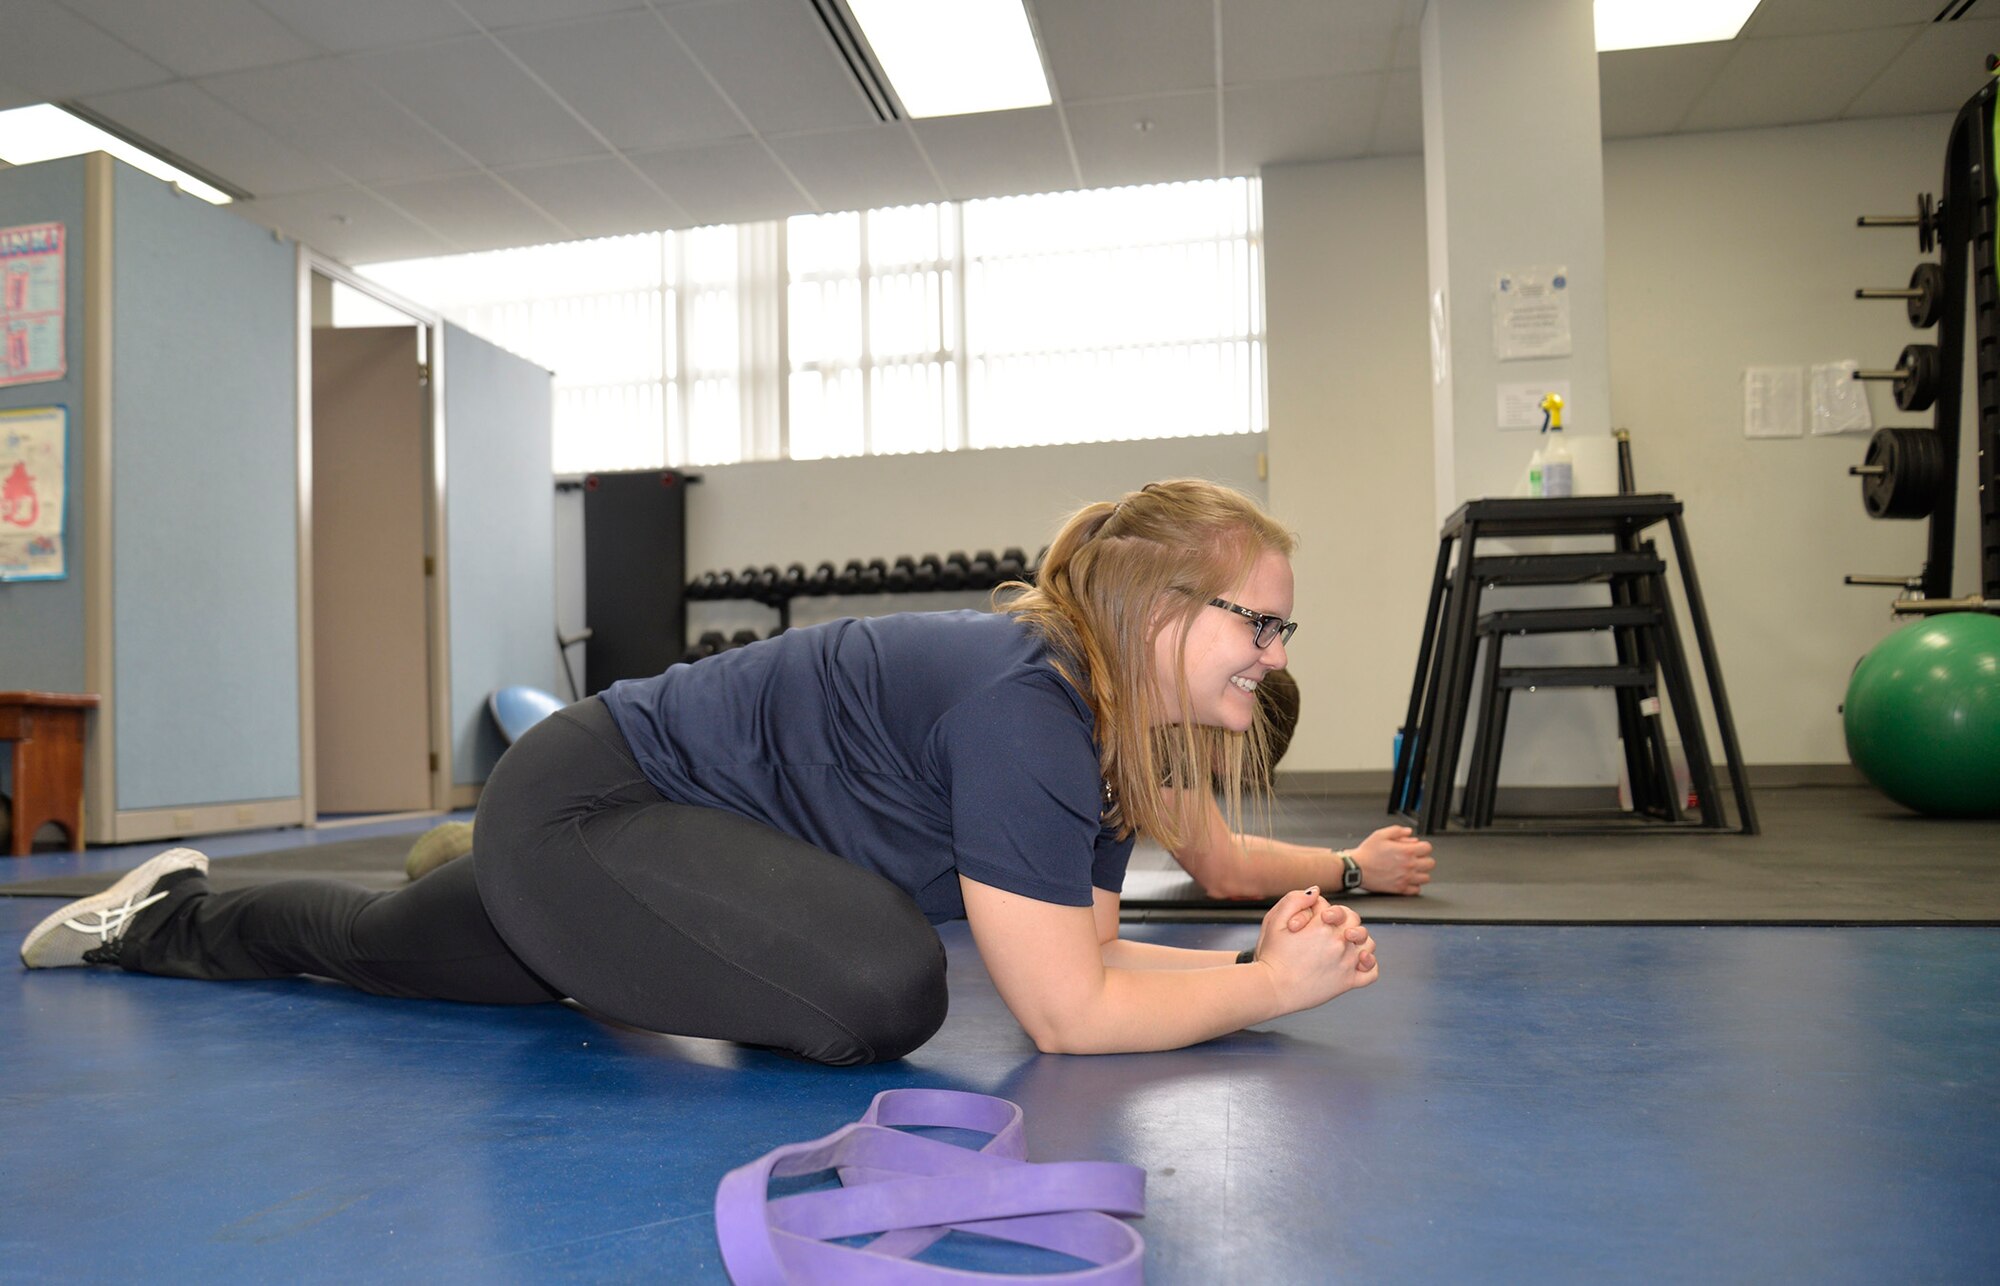 Hannah Kohne, a contractor at the 711th Human Performance Wing, takes Staff Sgt. Alan Gagnon through a stretching routine as a part of the Function Bridge Fitness Study at Wright Patterson Air Force Base, Feb. 14th, 2019.